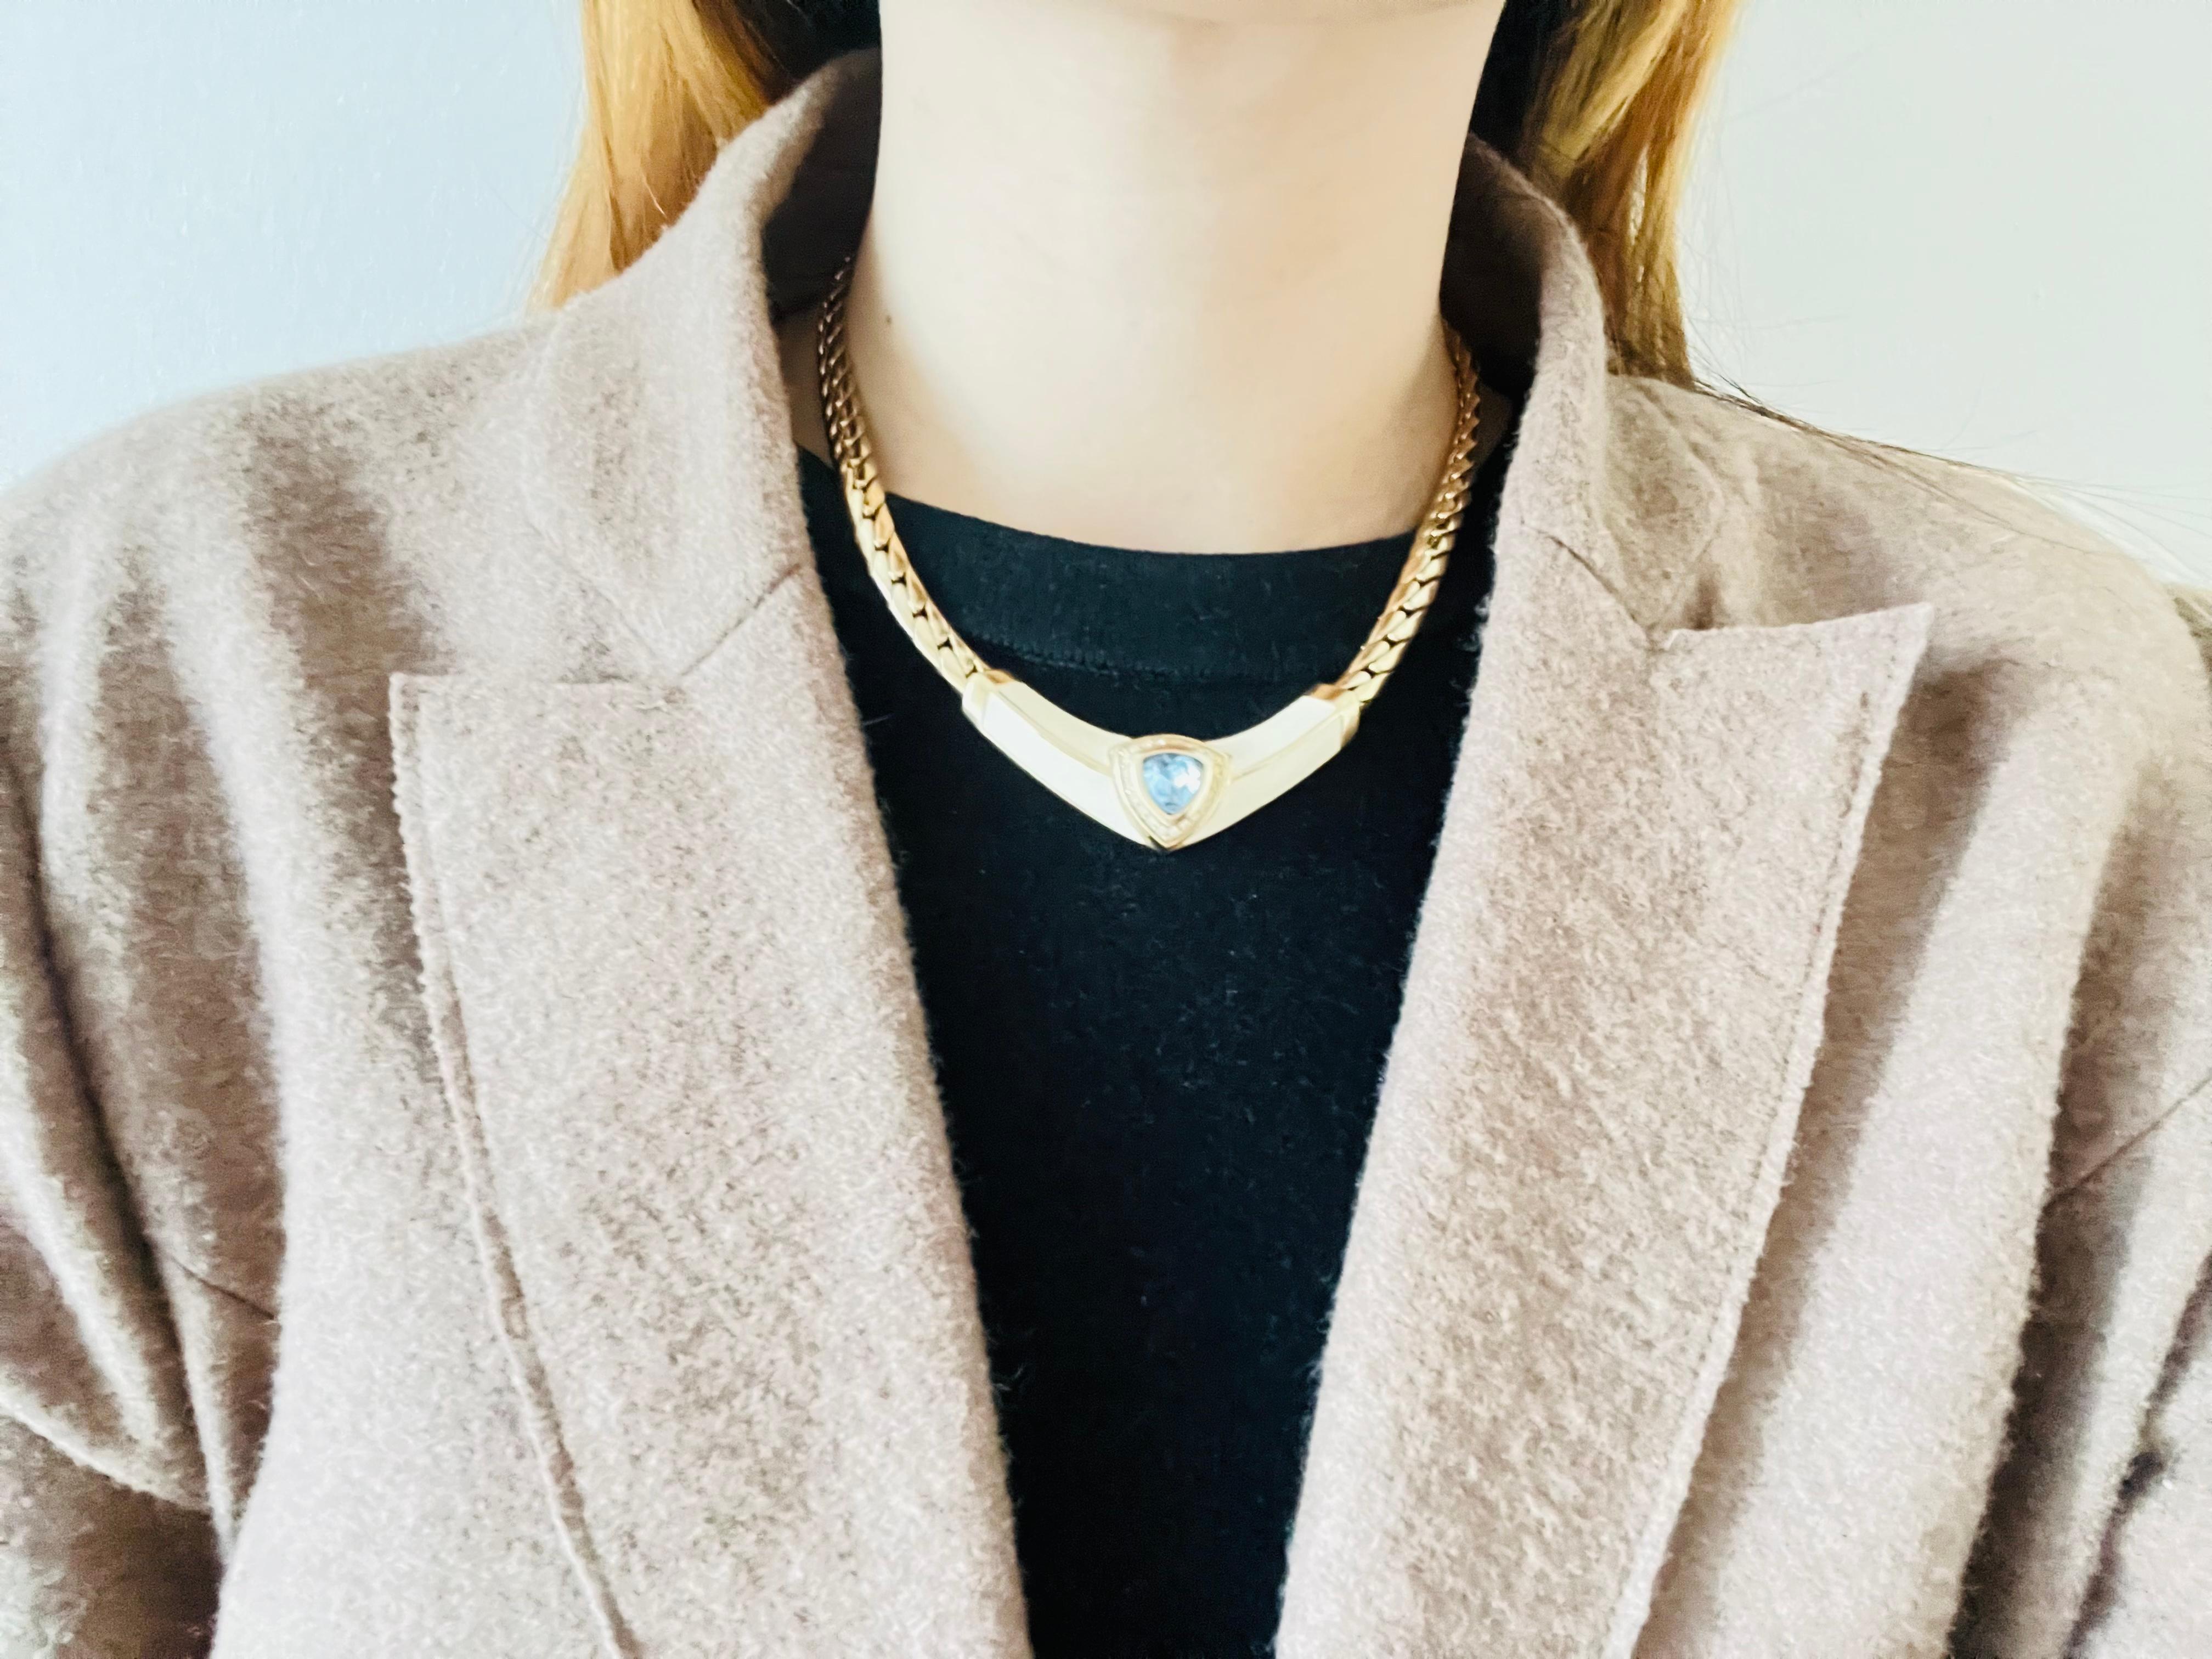 Christian Dior Vintage 1980s Aqua Blue Triangle Crystals Chunky White Necklace In Excellent Condition For Sale In Wokingham, England